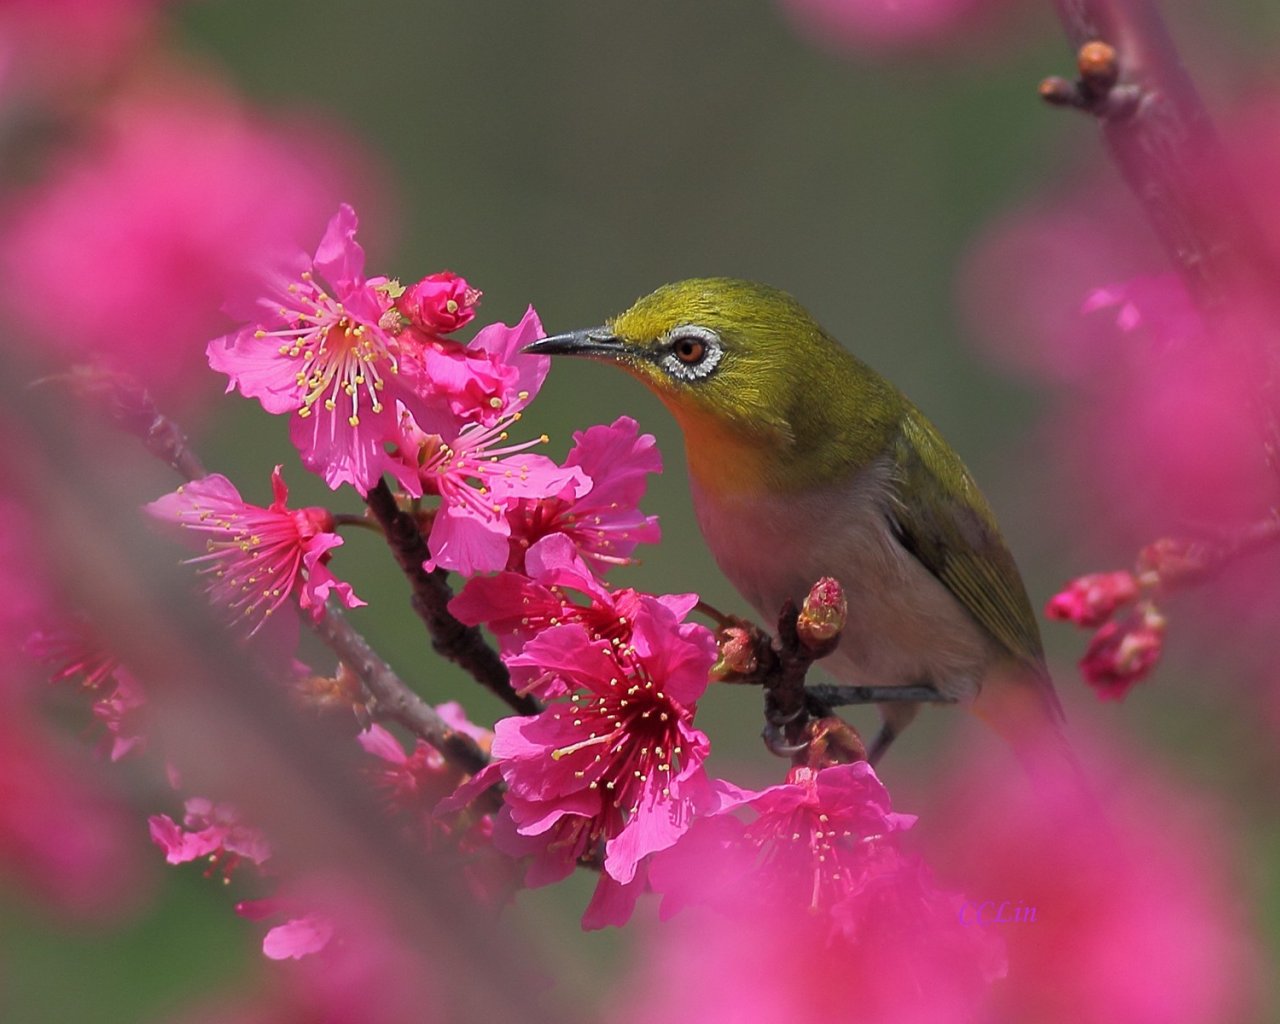 flowers and birds wallpaper which is under the birds wallpapers